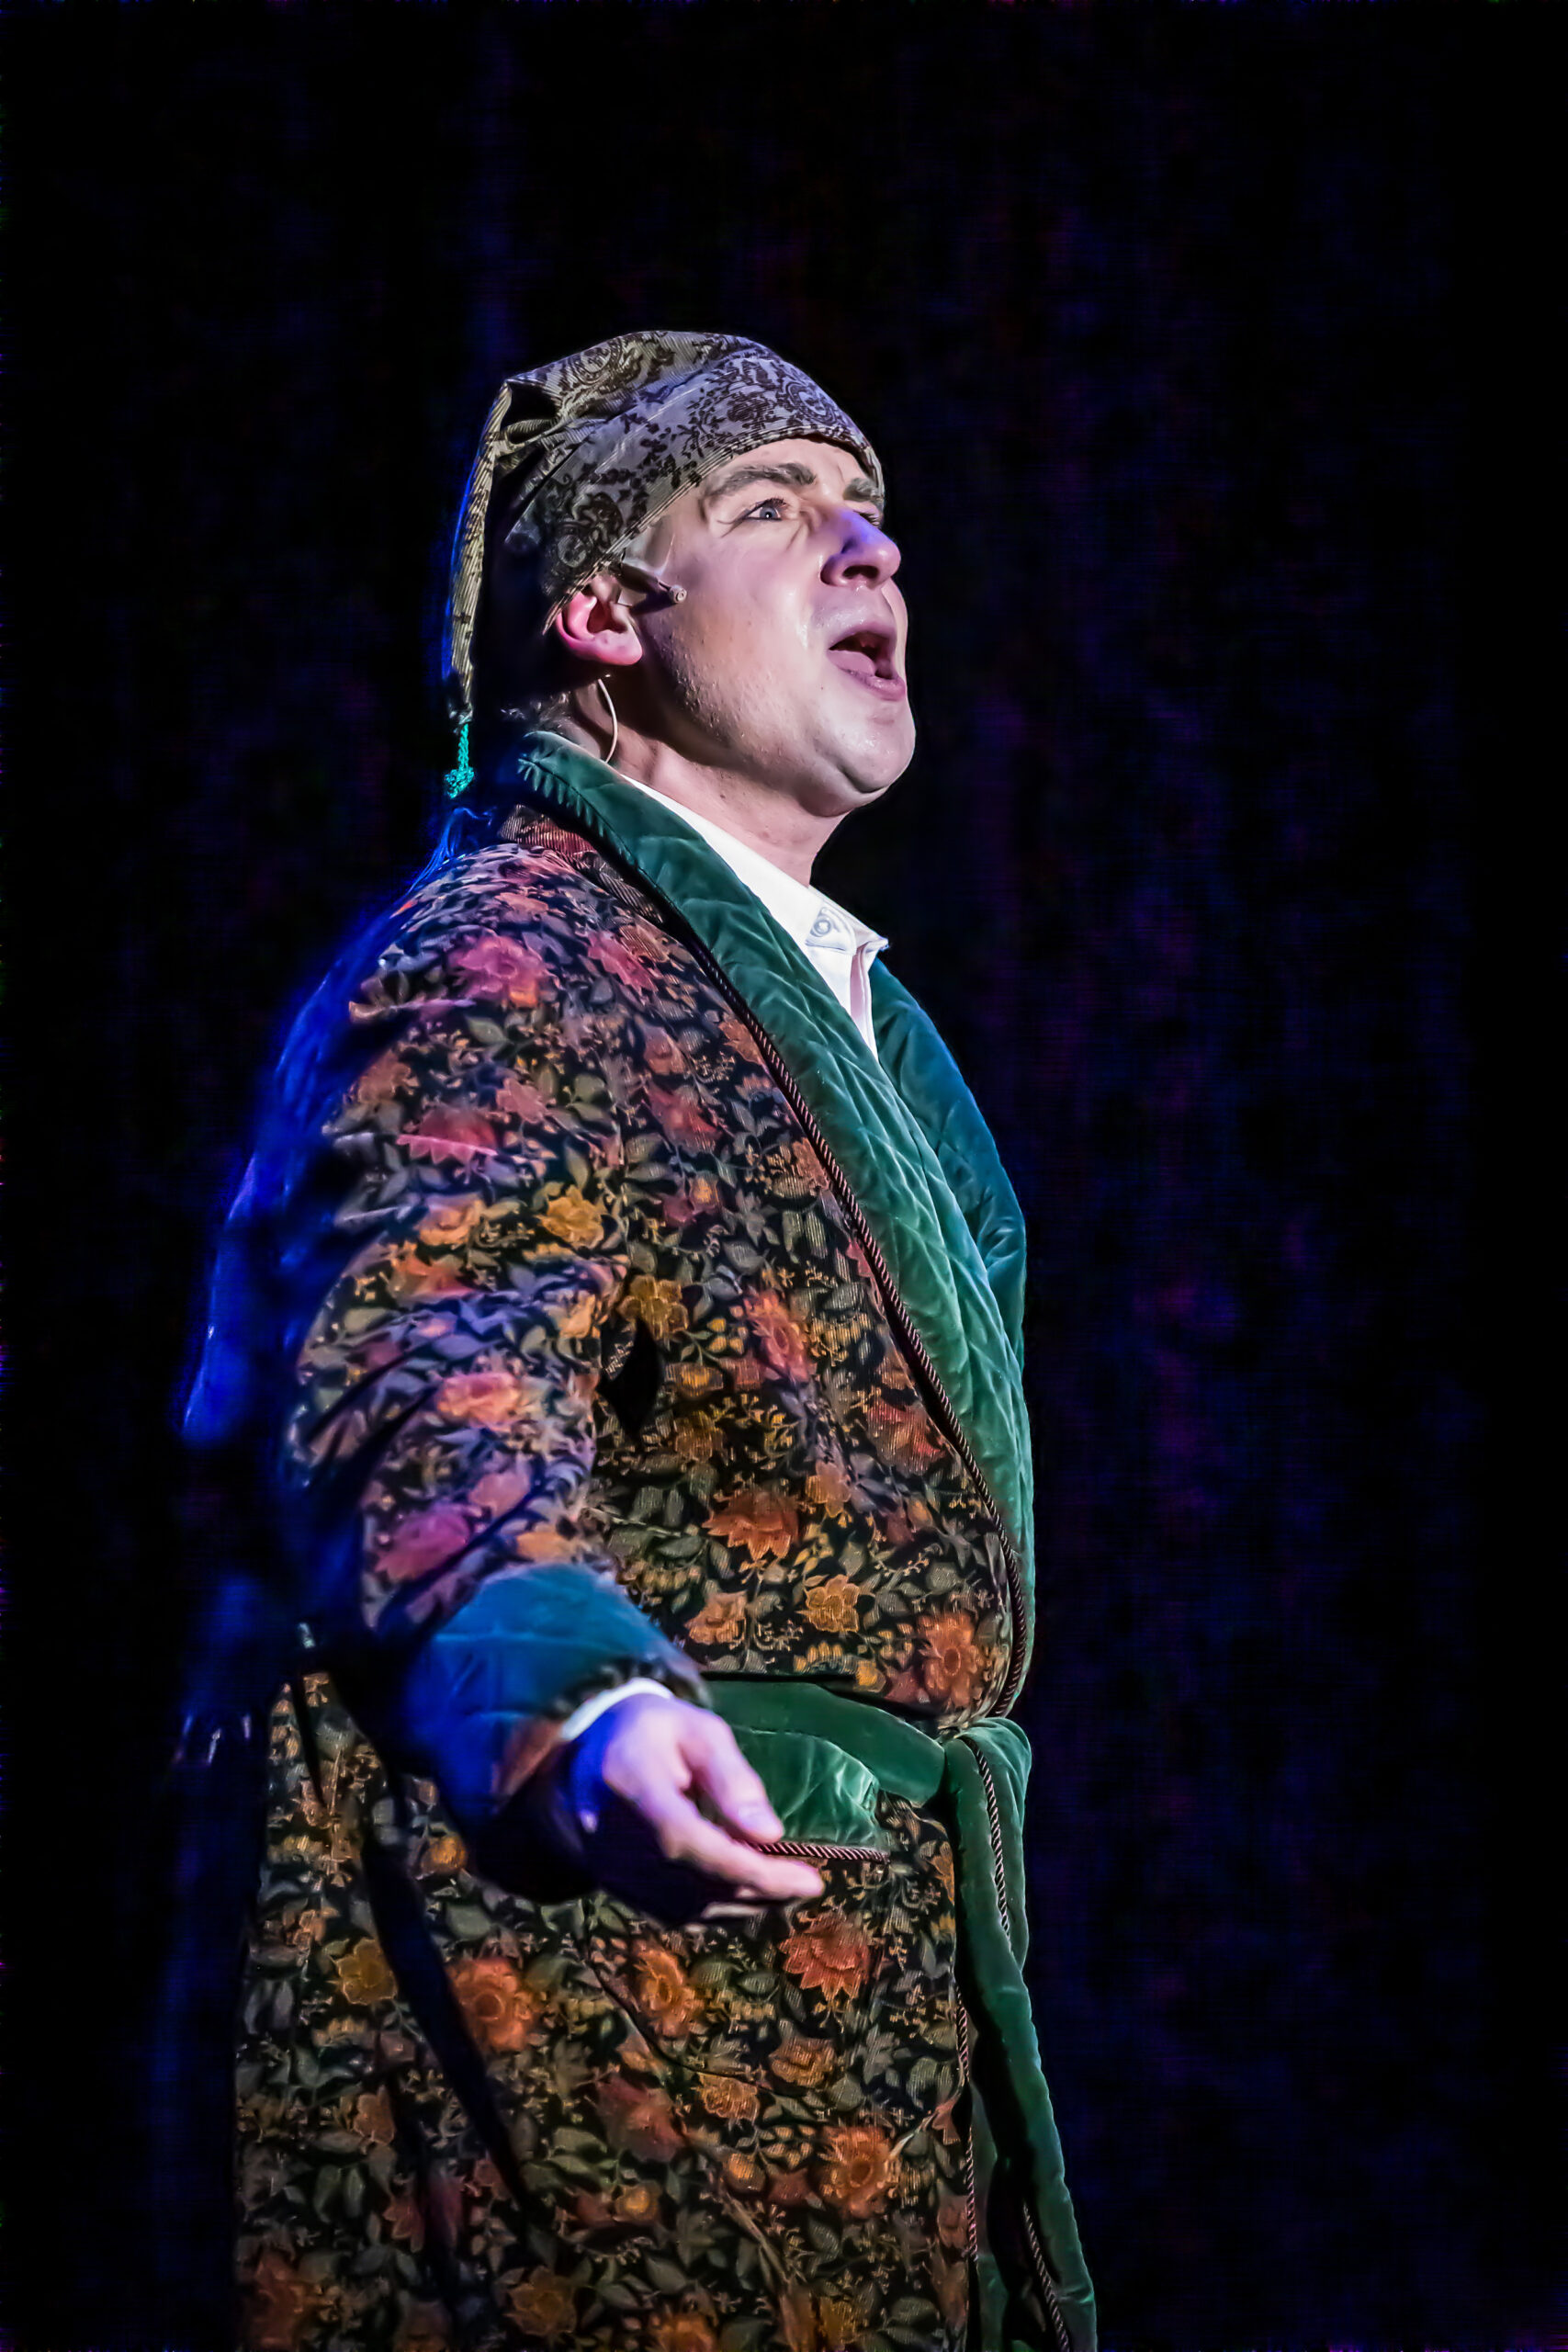 A man playing Ebenezer Scrooge speaks during a performance of A Christmas Carol